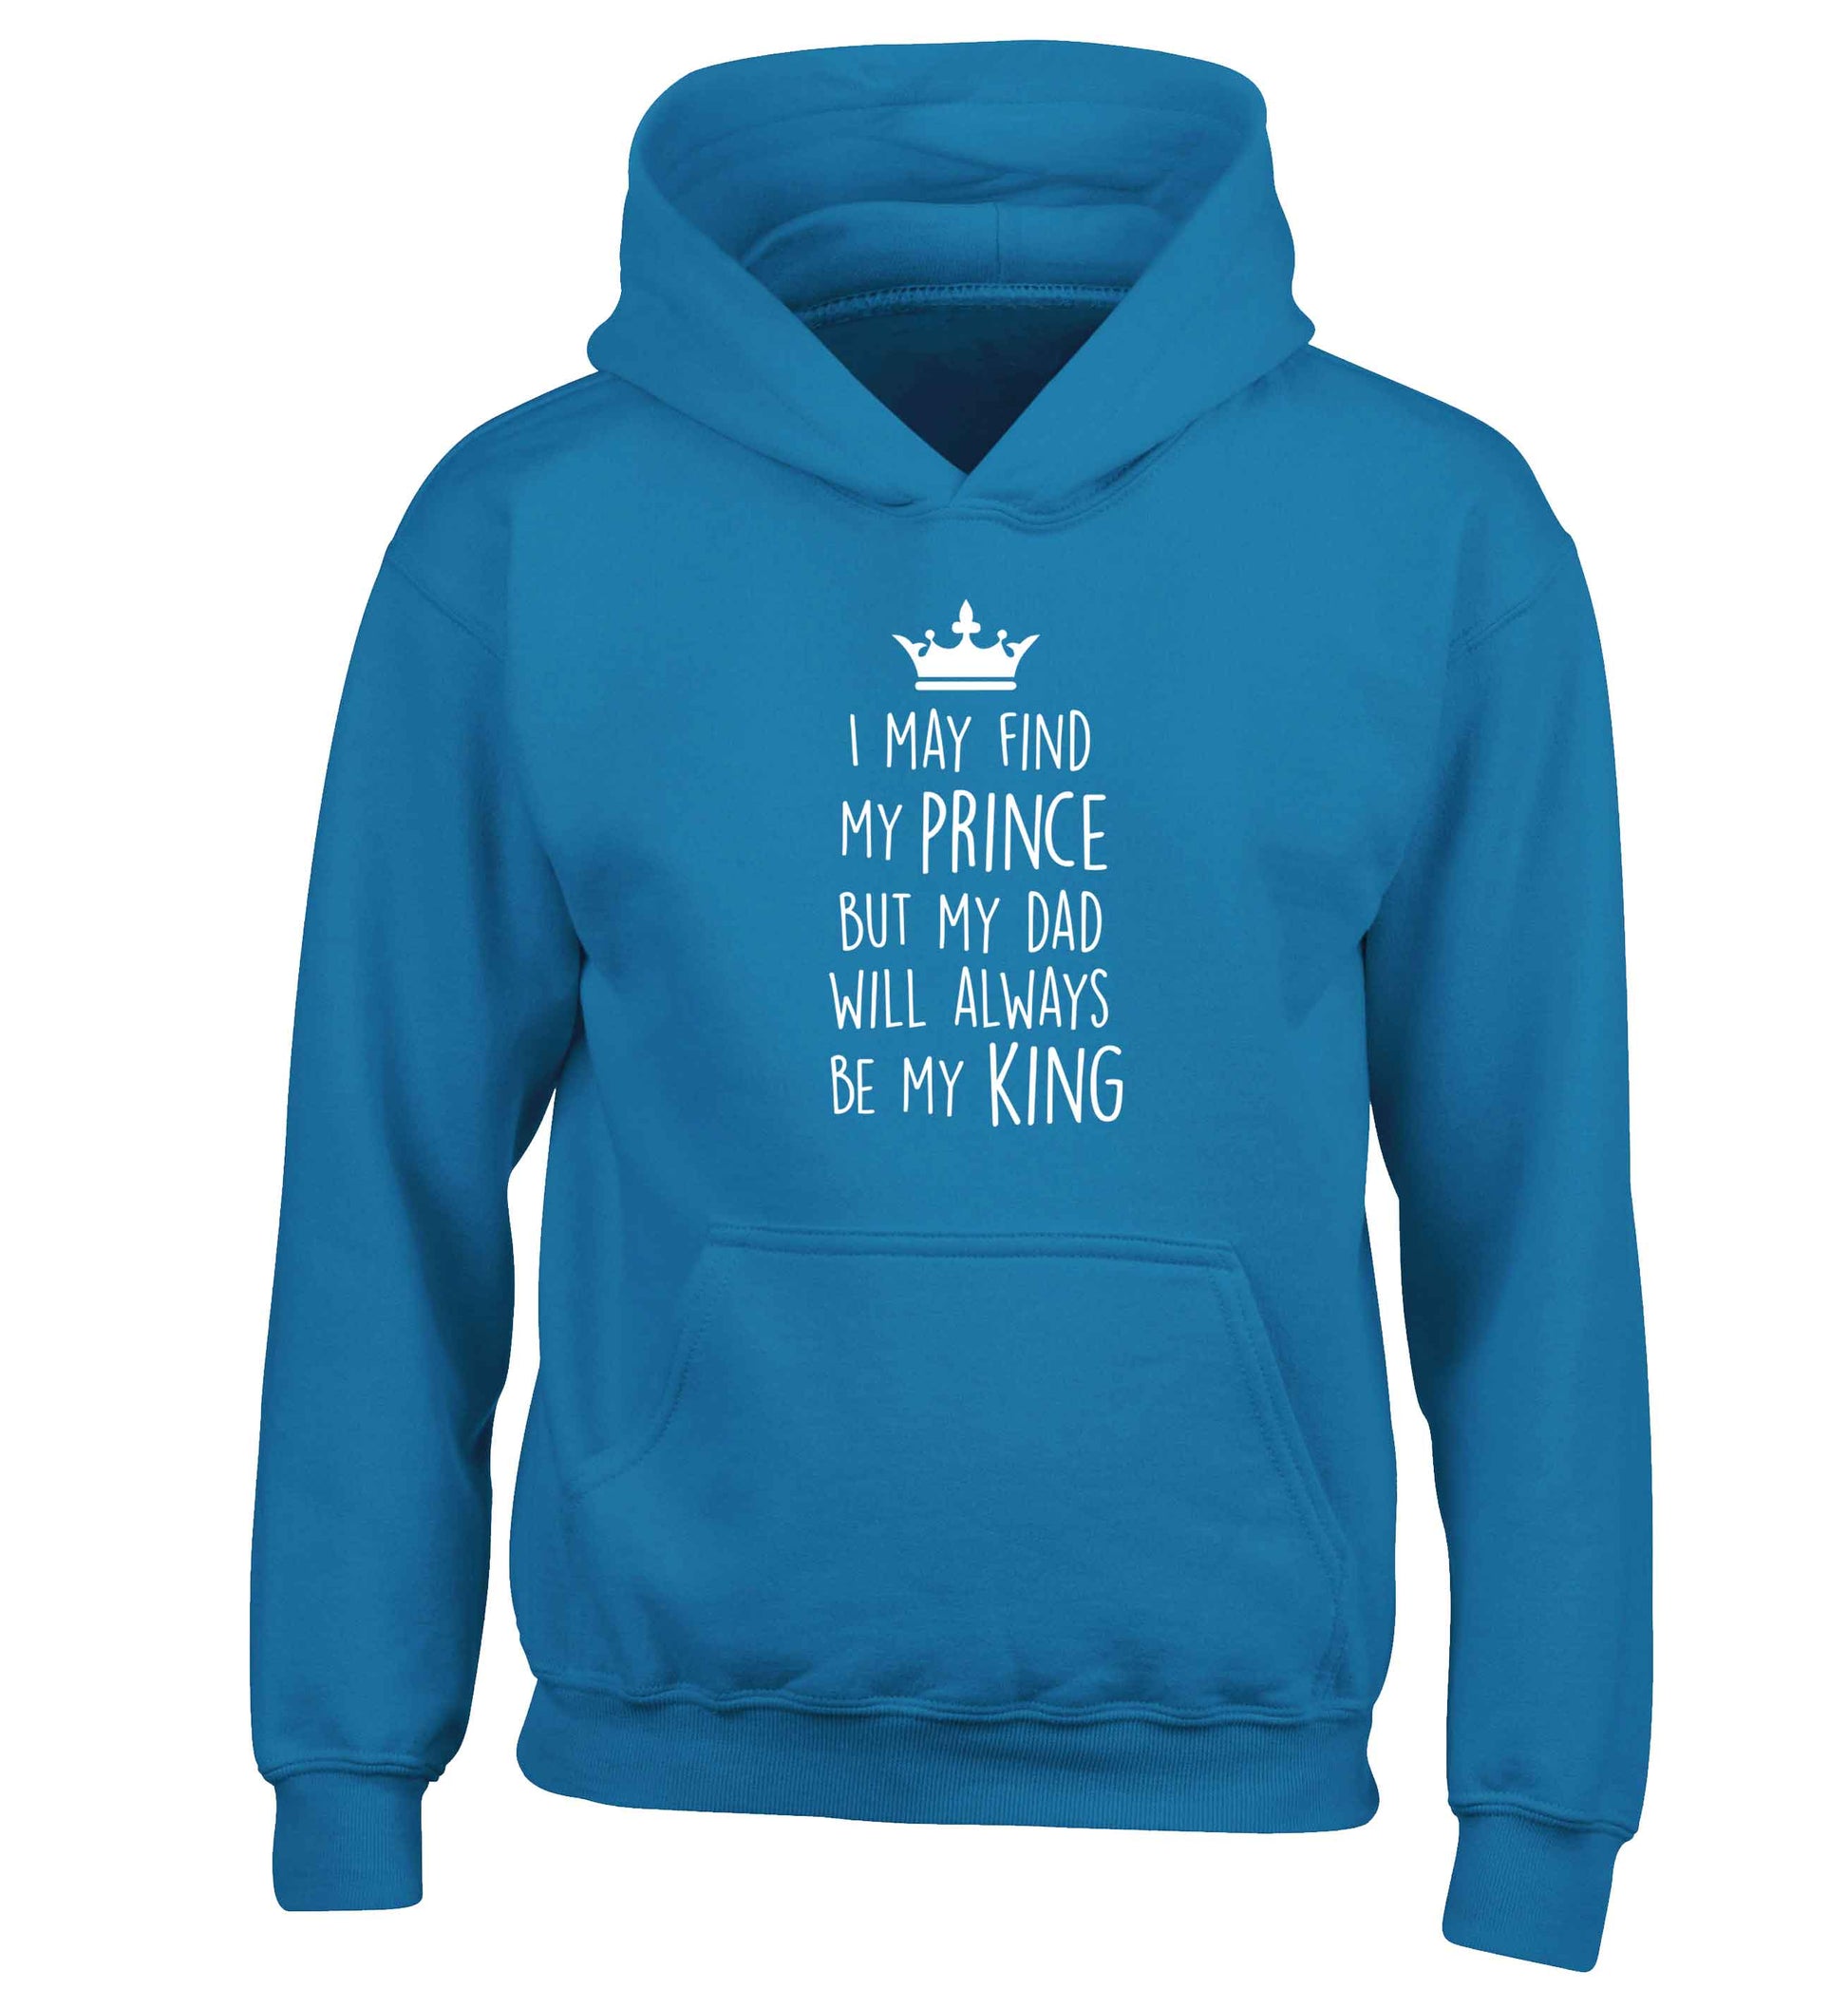 I may find my prince but my dad will always be my king children's blue hoodie 12-13 Years